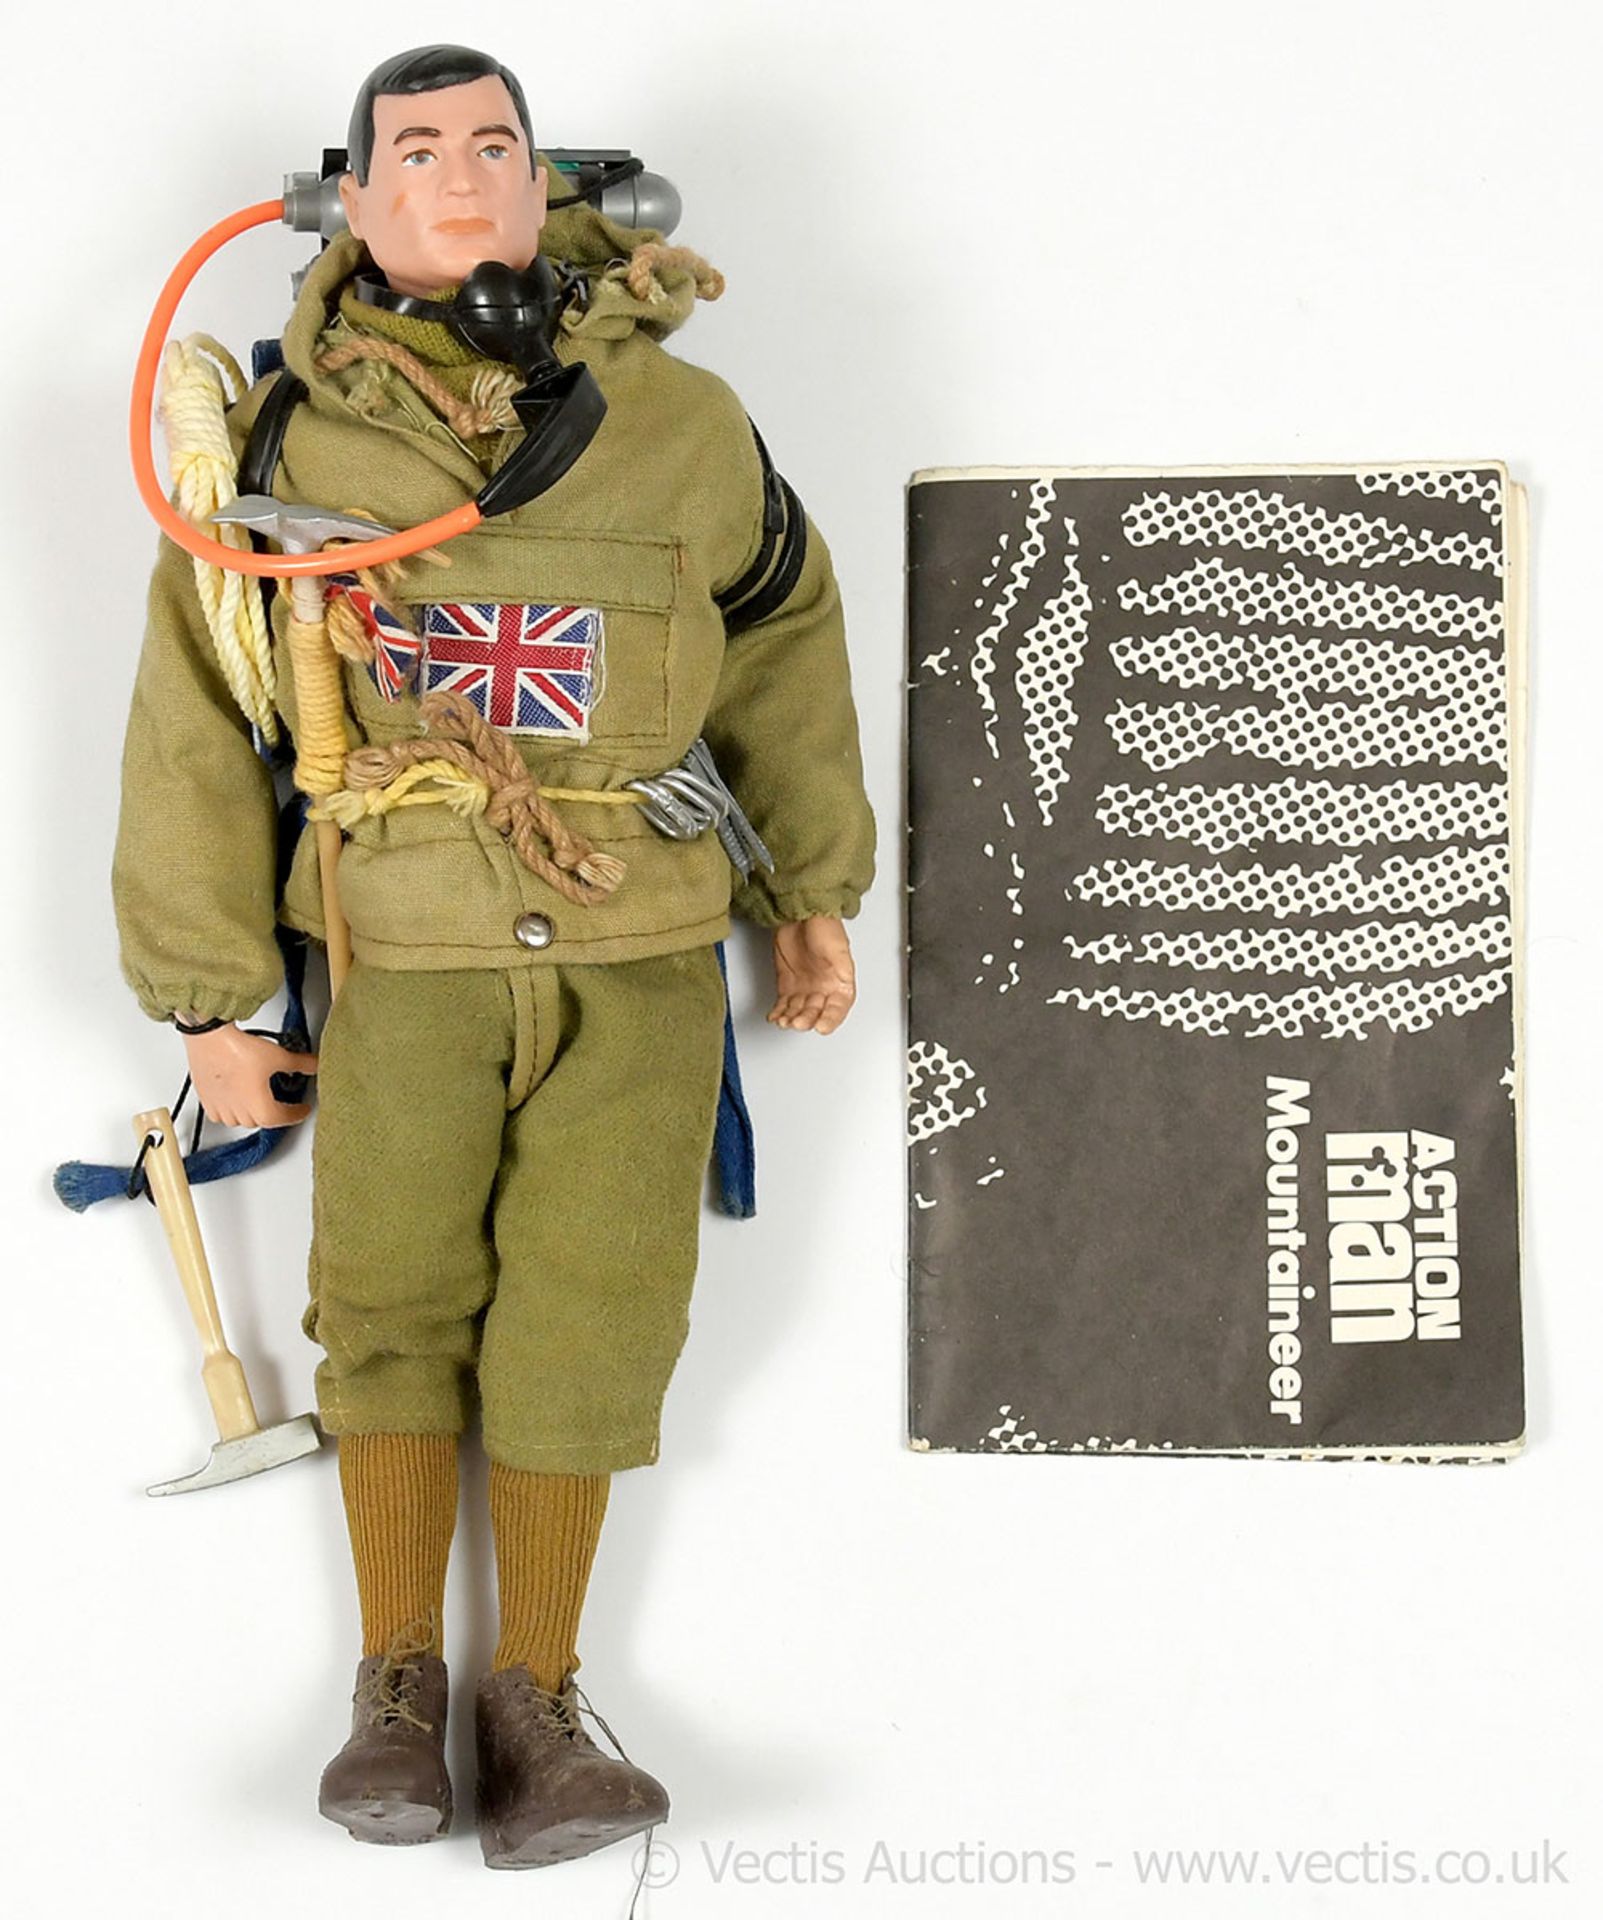 Palitoy Action Man Vintage Mountaineer - early